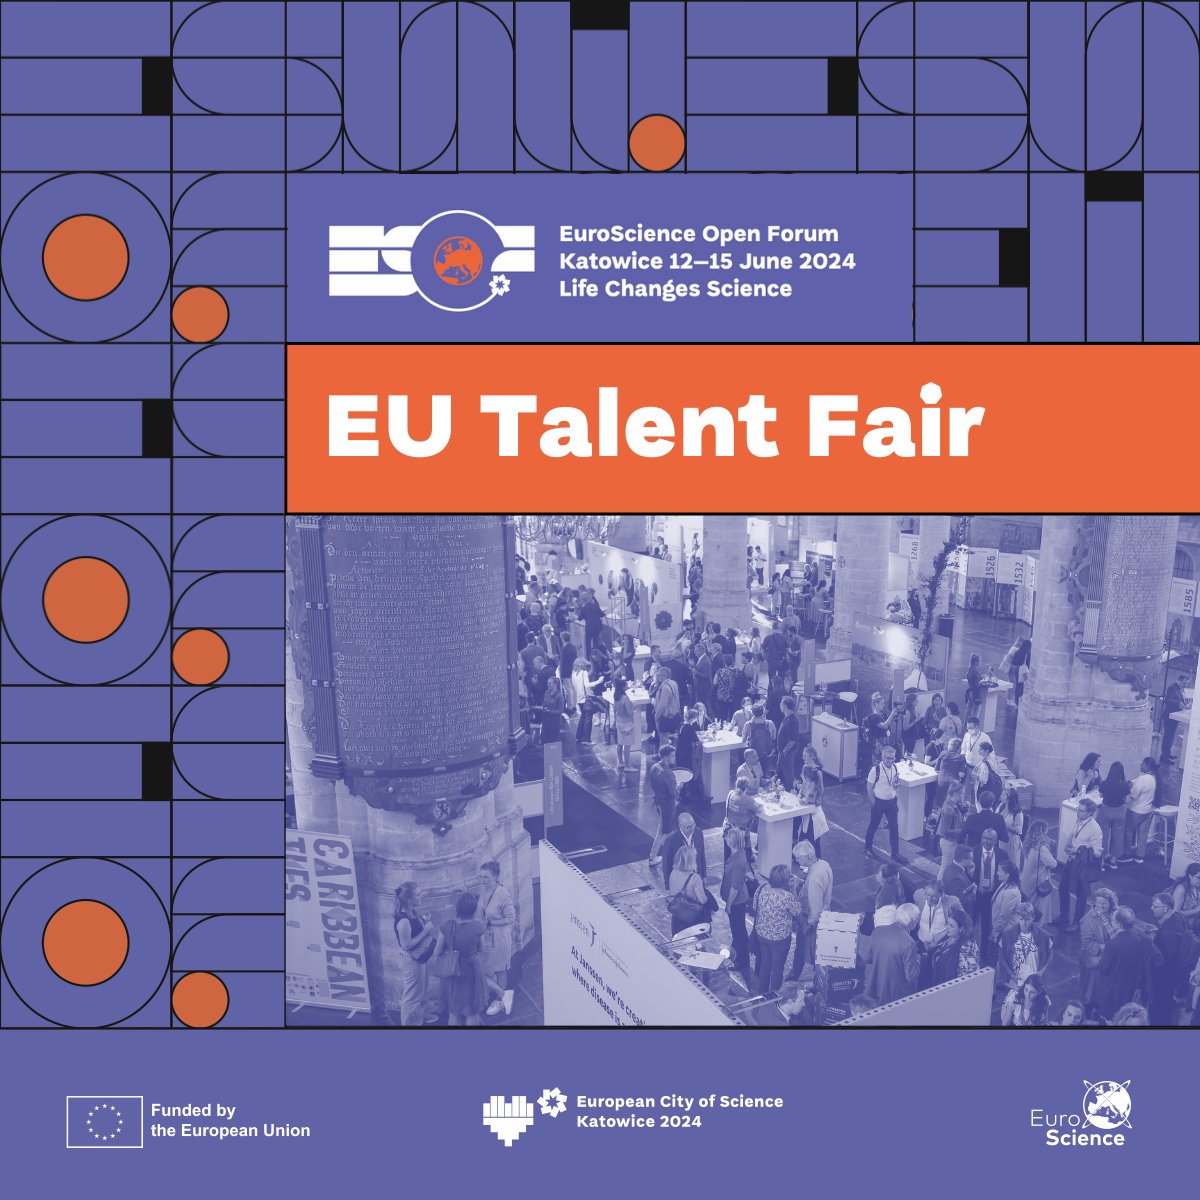 💡 Find out how the #EUTalentFair2024 can assist you in entering the research world. Our goal is to offer the chance to learn about professional development possibilities in research in both academia and beyond. 👉 esof.eu/eu-talent-fair